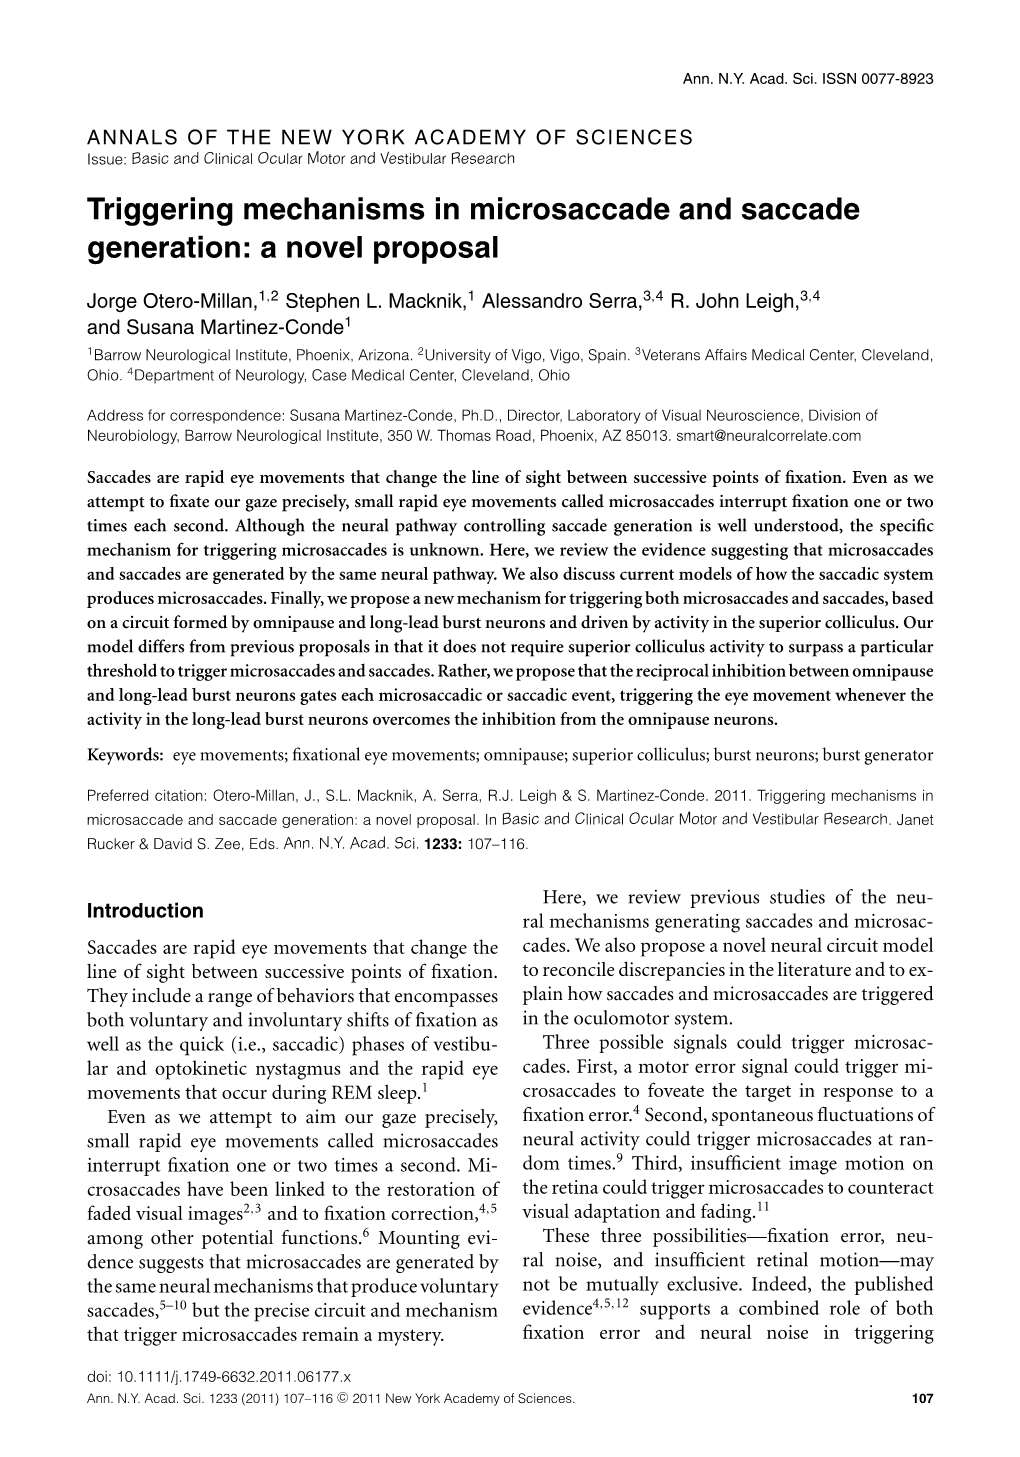 Triggering Mechanisms in Microsaccade and Saccade Generation: a Novel Proposal